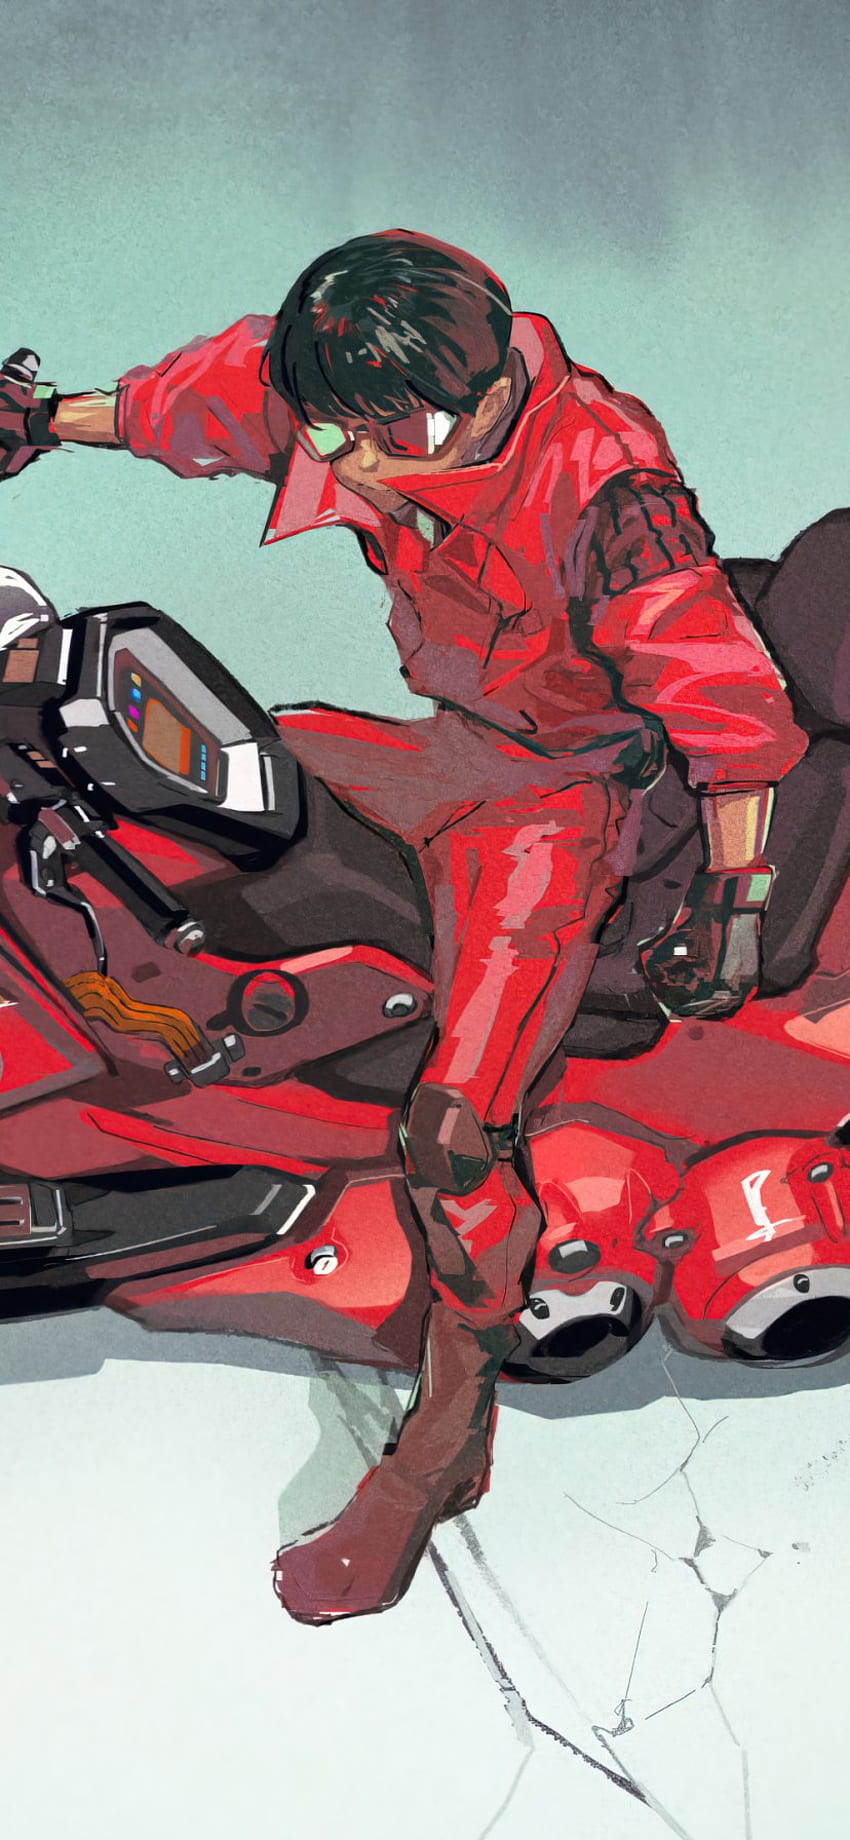 A few more Akira concepts in various anime styles : r/akira